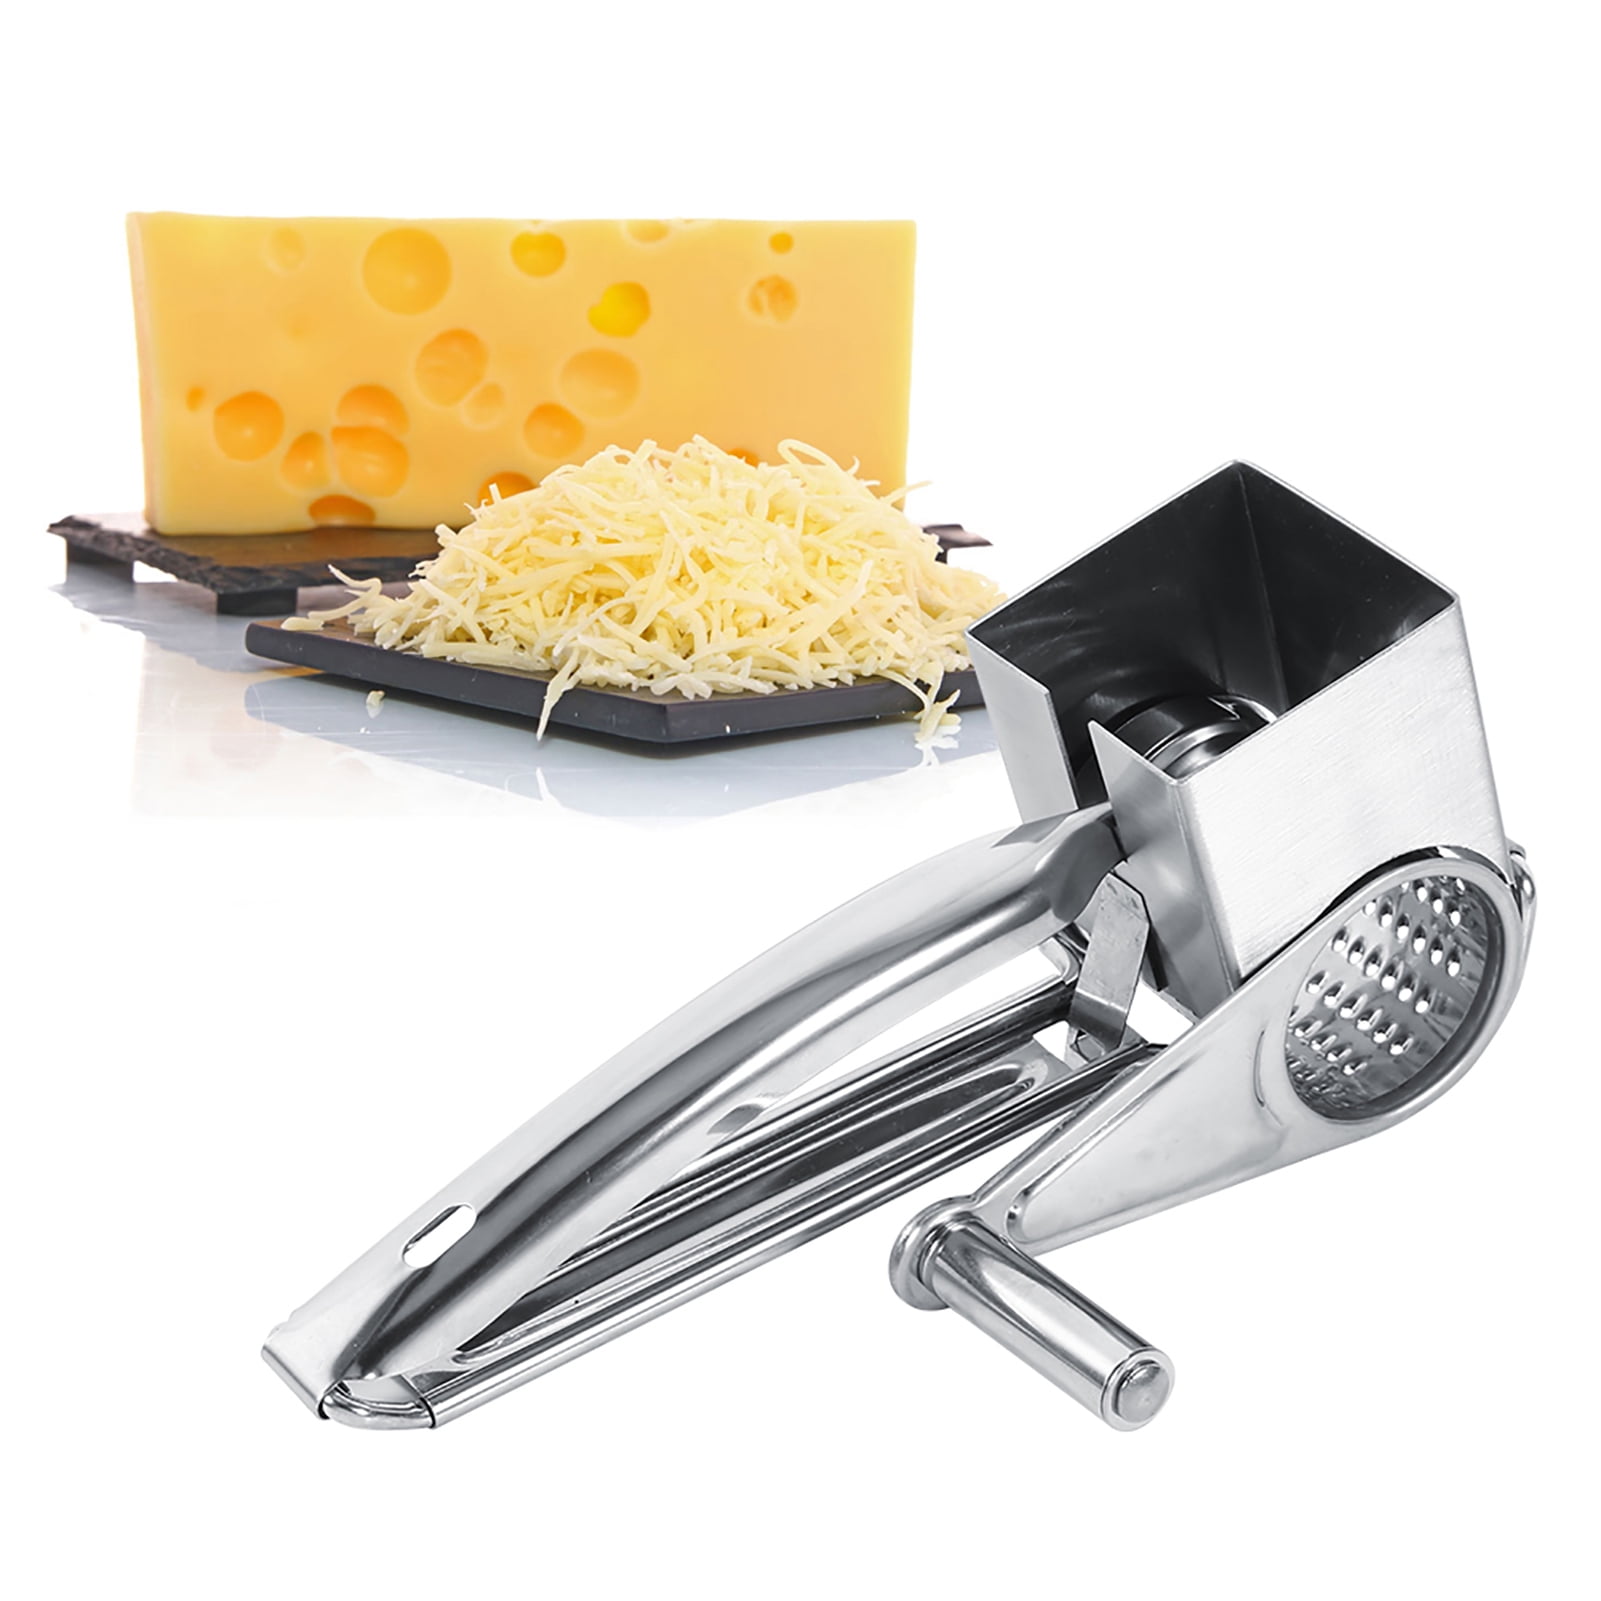 Stainless Steel Cylinder Grater Multifunctional Kitchen Craft Rotary Cheese Grater Slice Shred Tool for Chocolate Vegetables Rotary Cheese Grater Fruits 